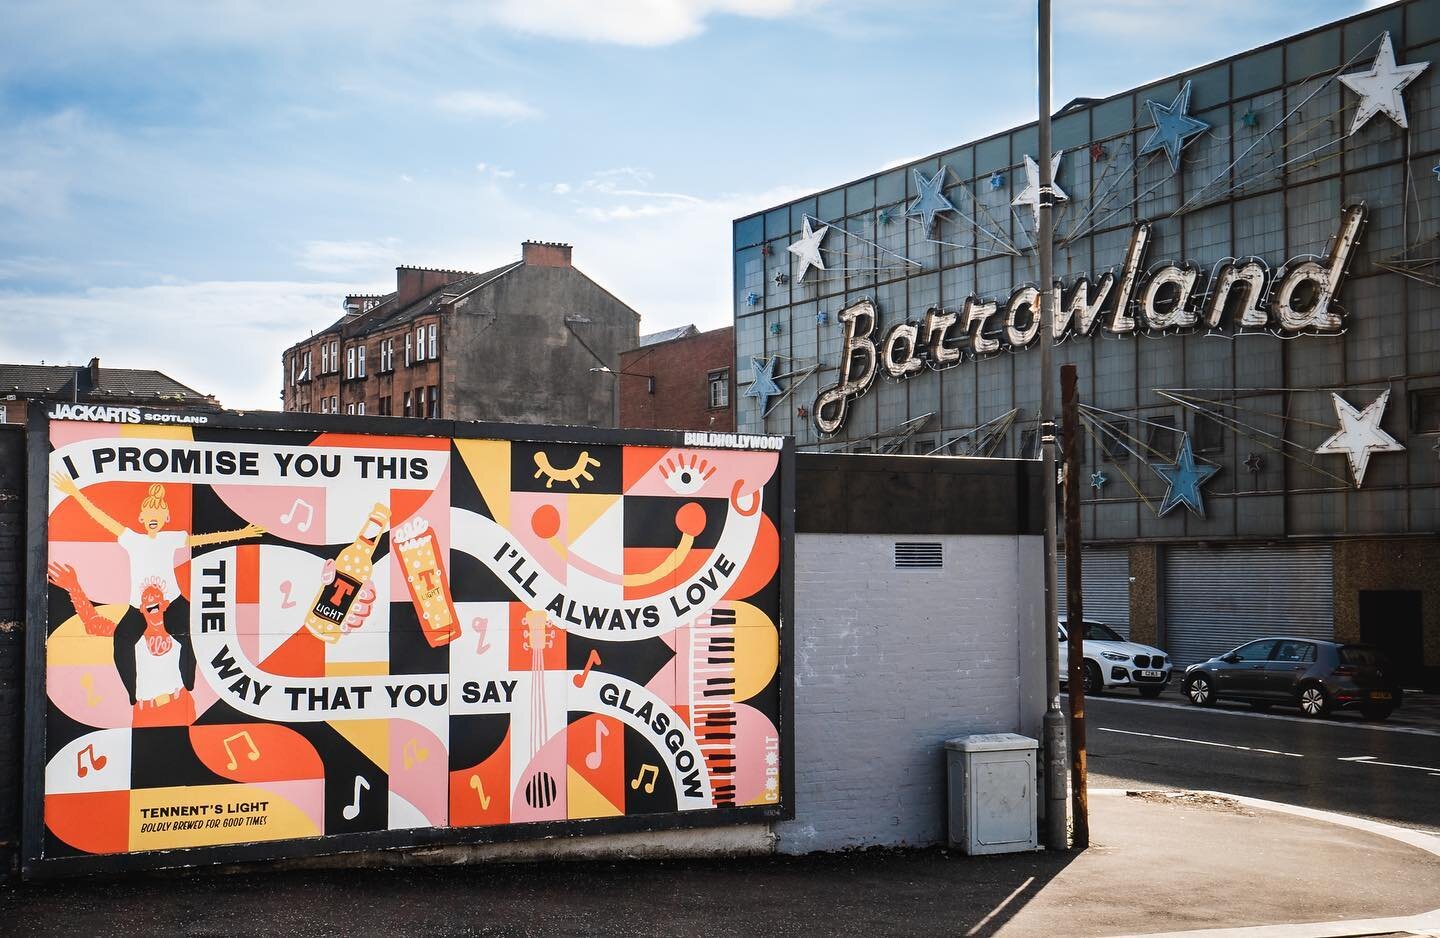 Back in September Glasgow&rsquo;s favourite lager asked us to paint a billboard for Glasgow&rsquo;s favourite band for their upcoming gig at Glasgow&rsquo;s favourite music venue. Here&rsquo;s what we came up with&hellip;